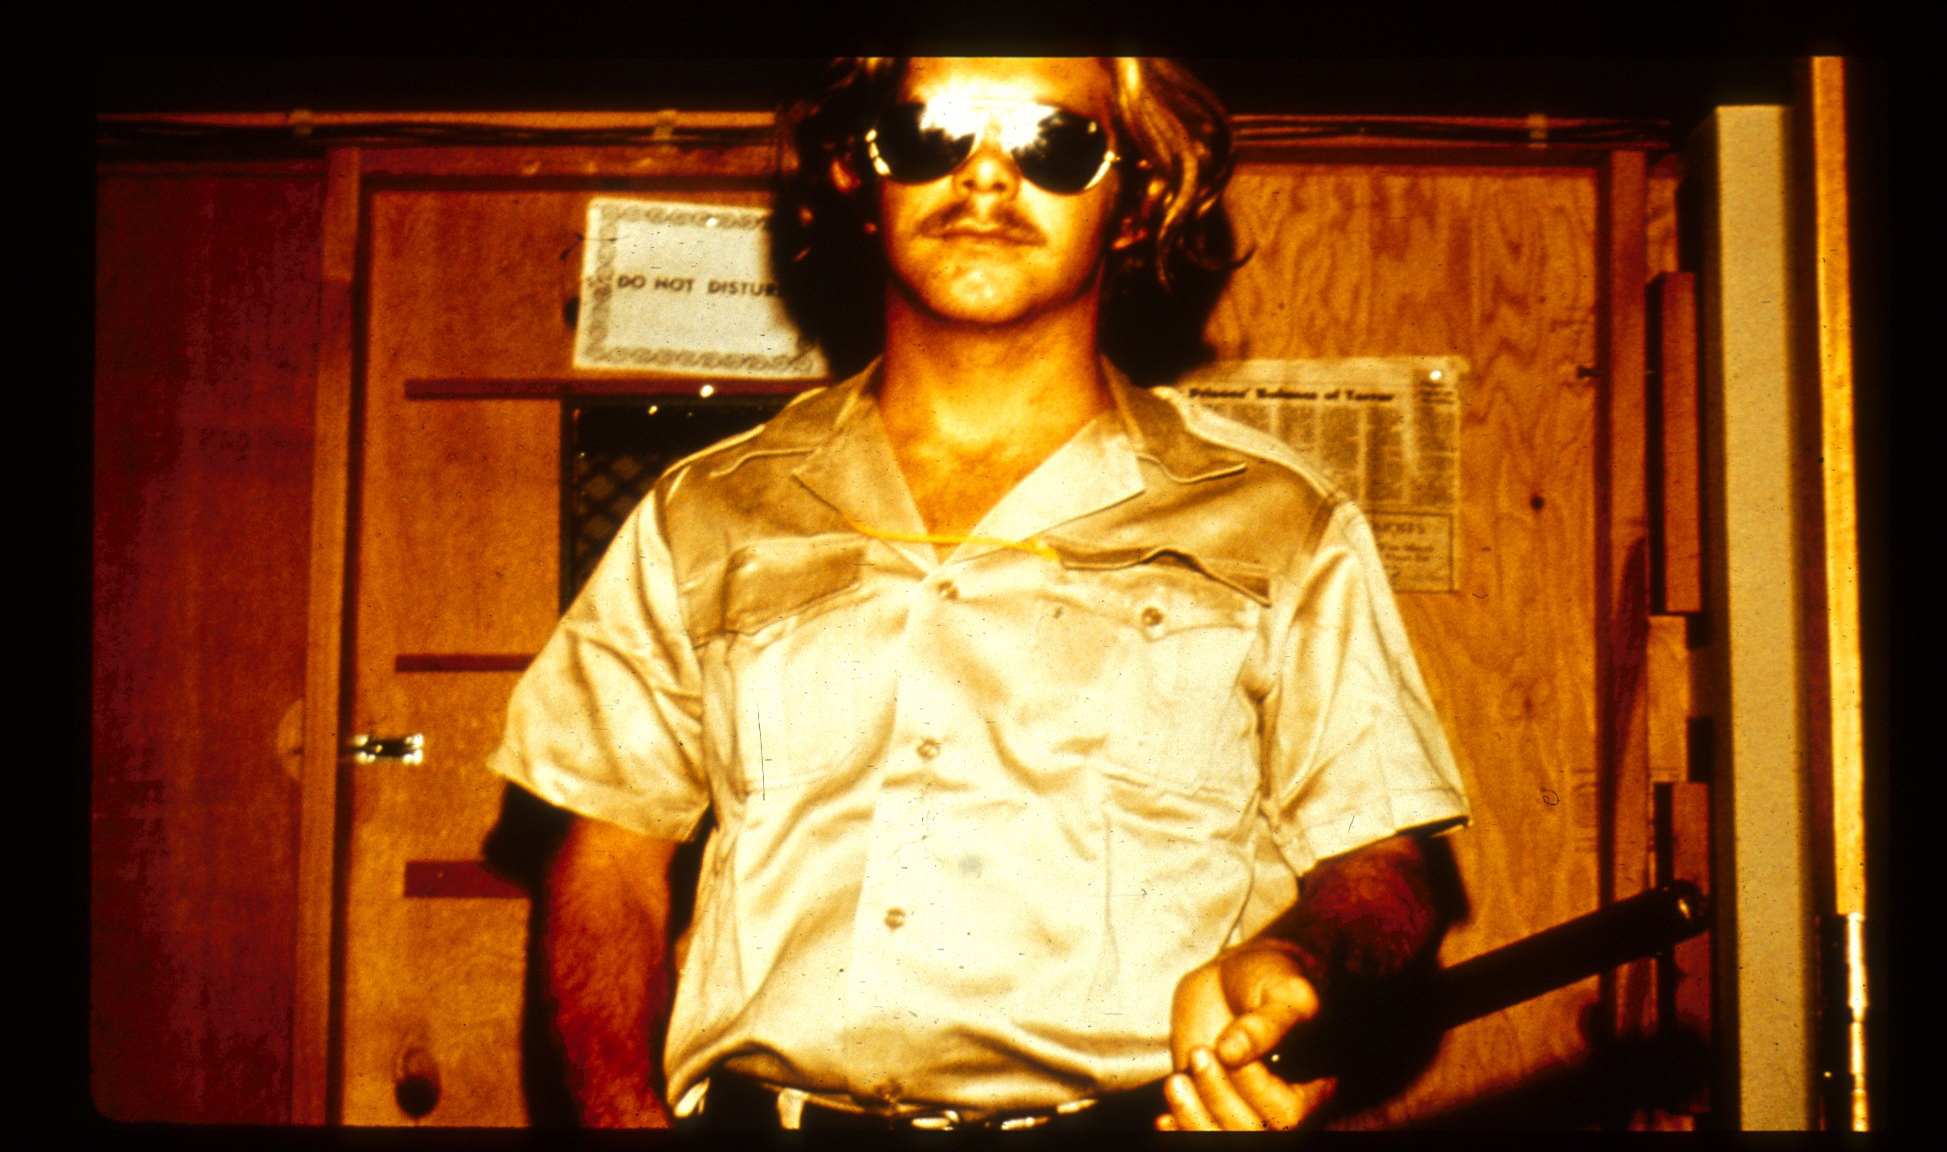 Guard with mirrored sunglasses holding a baton.